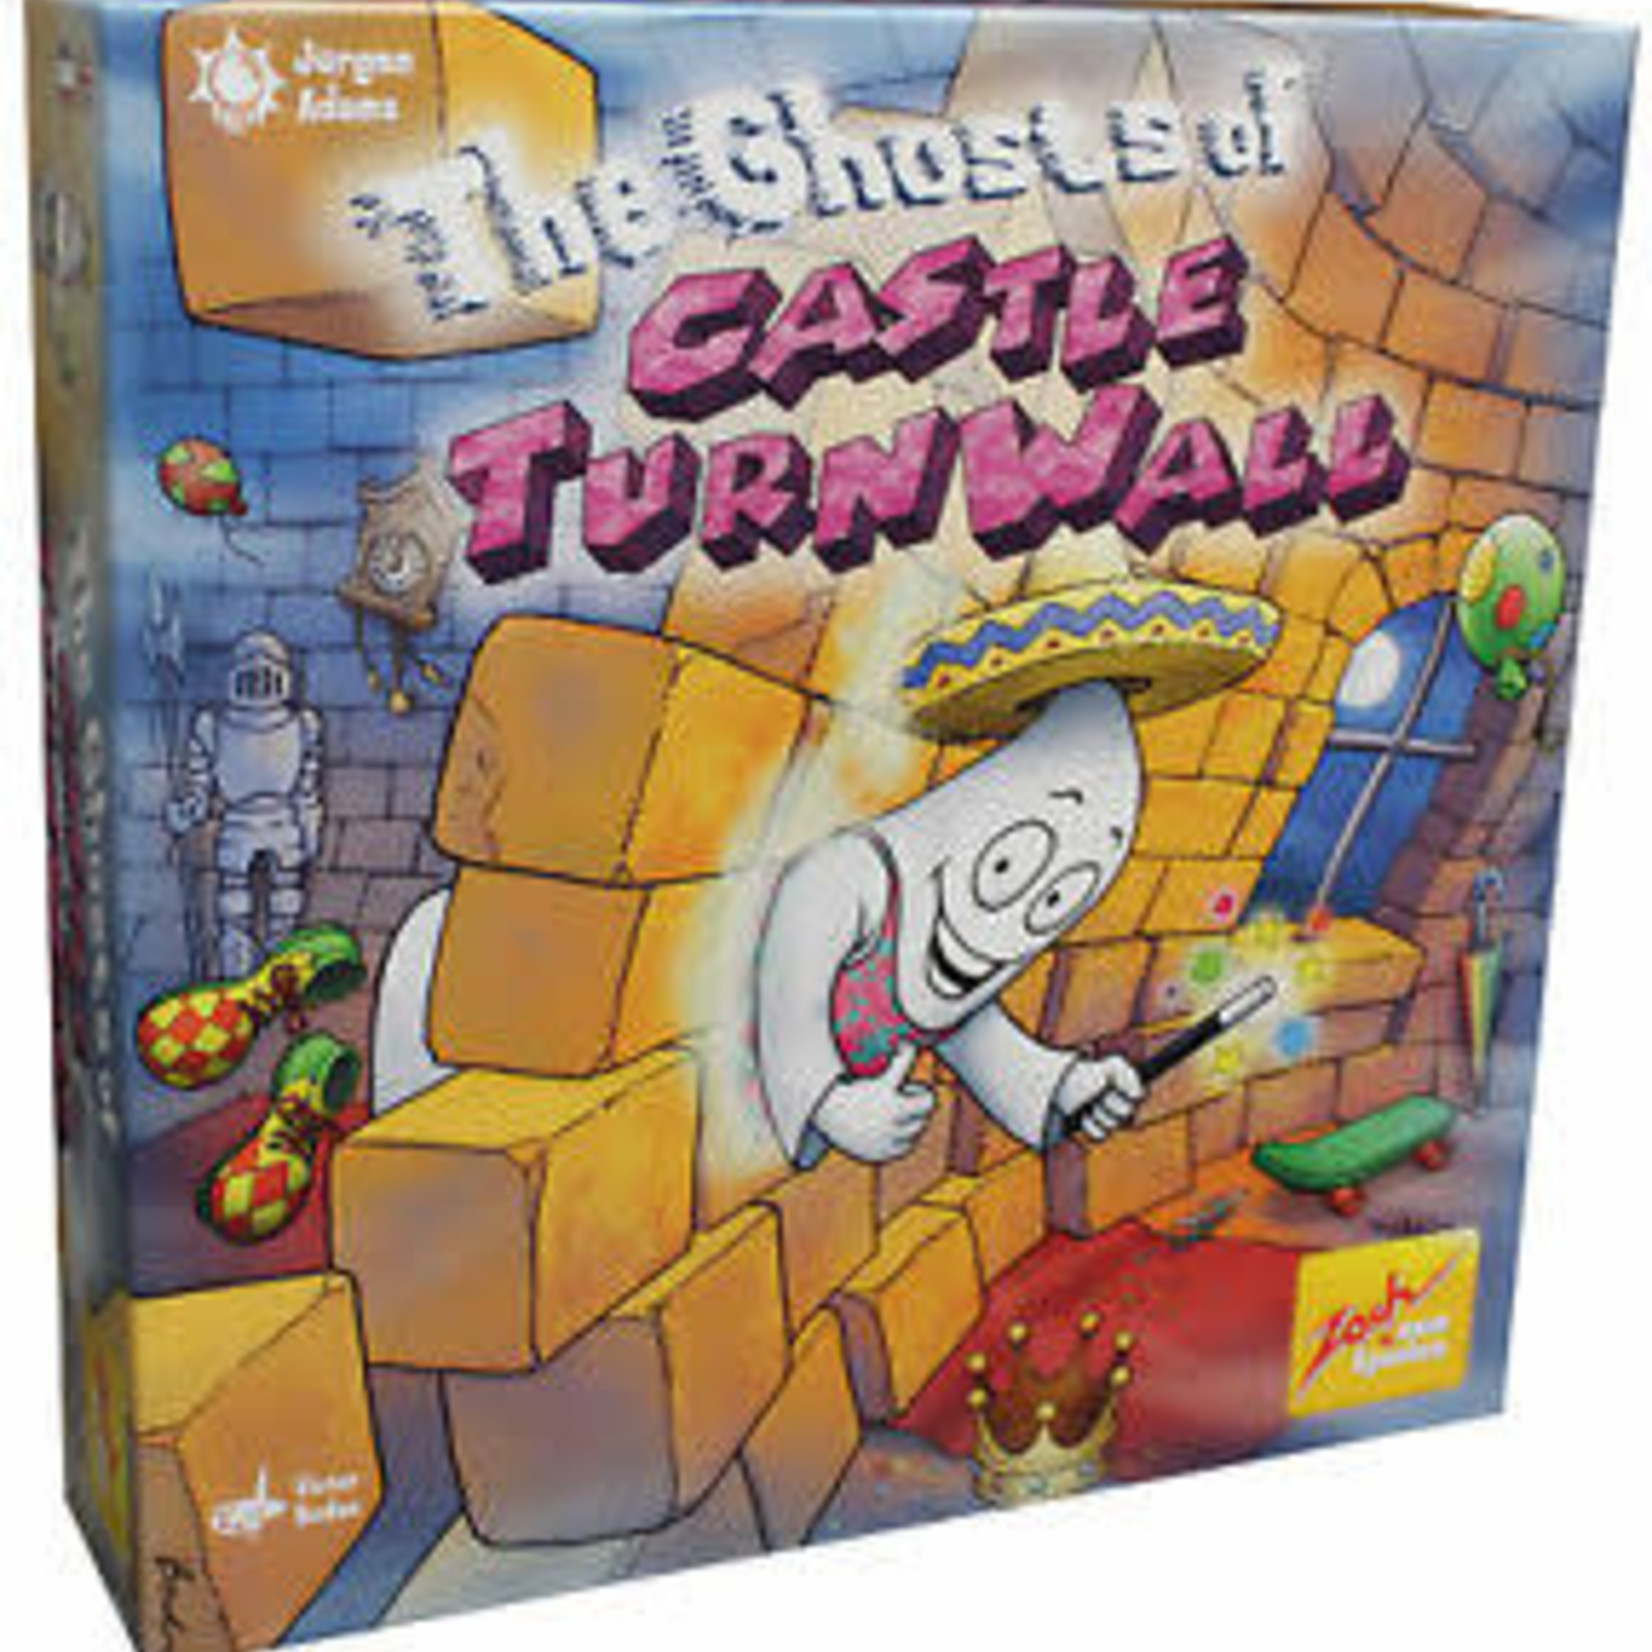 Ghosts of Castle TurnWall